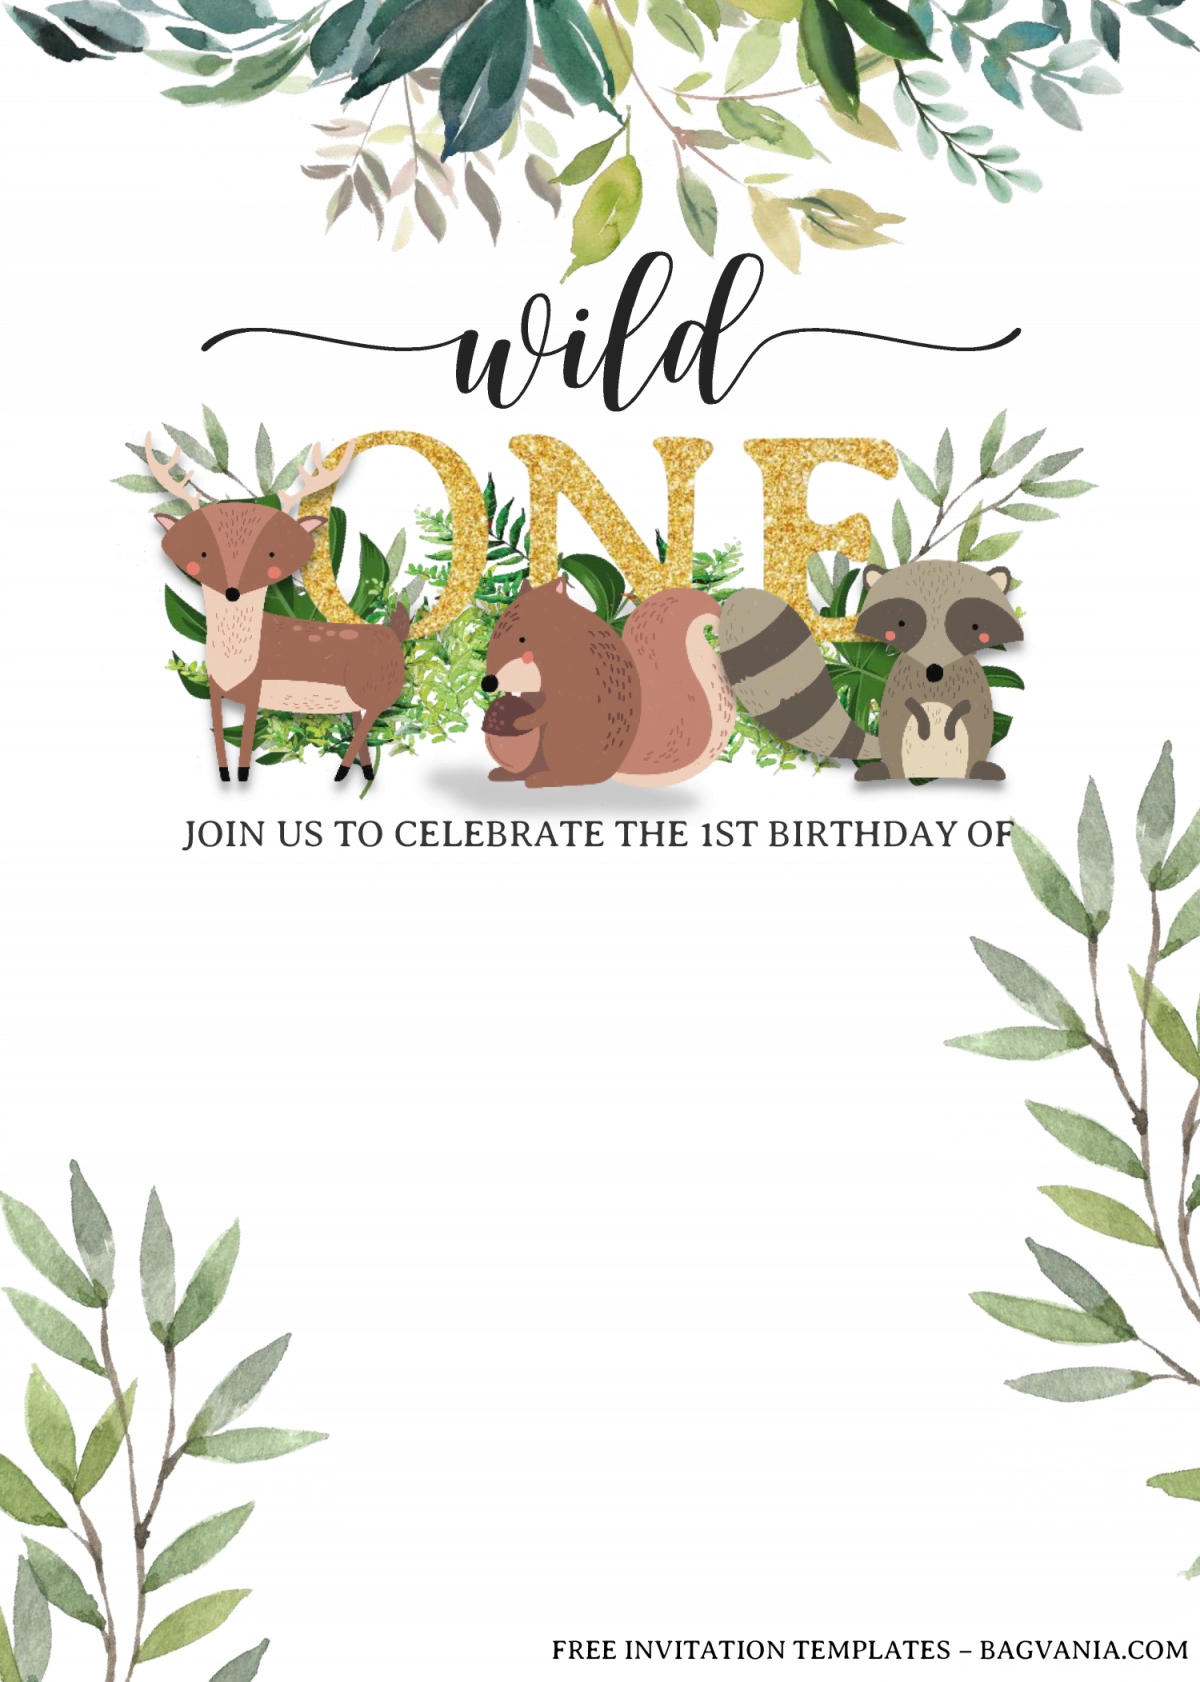 Wild One Invitation Templates - Editable With MS Word and has Gold Wording